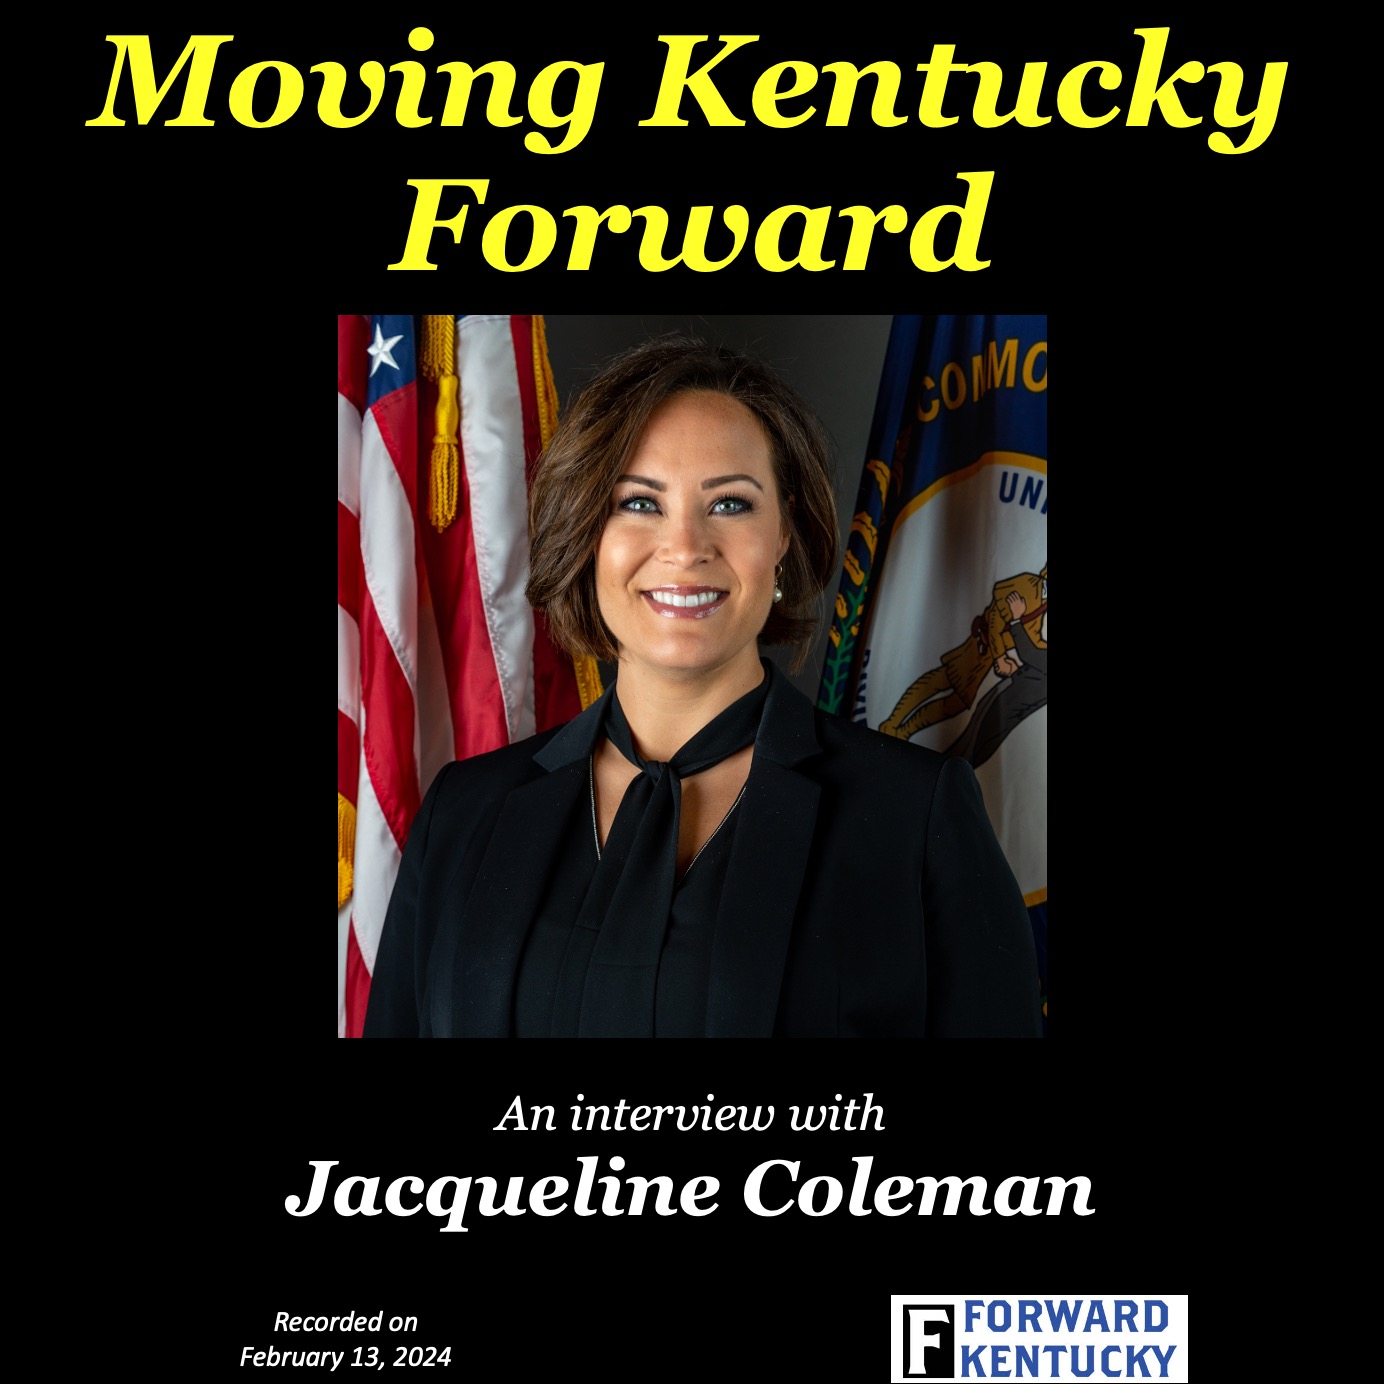 An Interview with Jacqueline Coleman